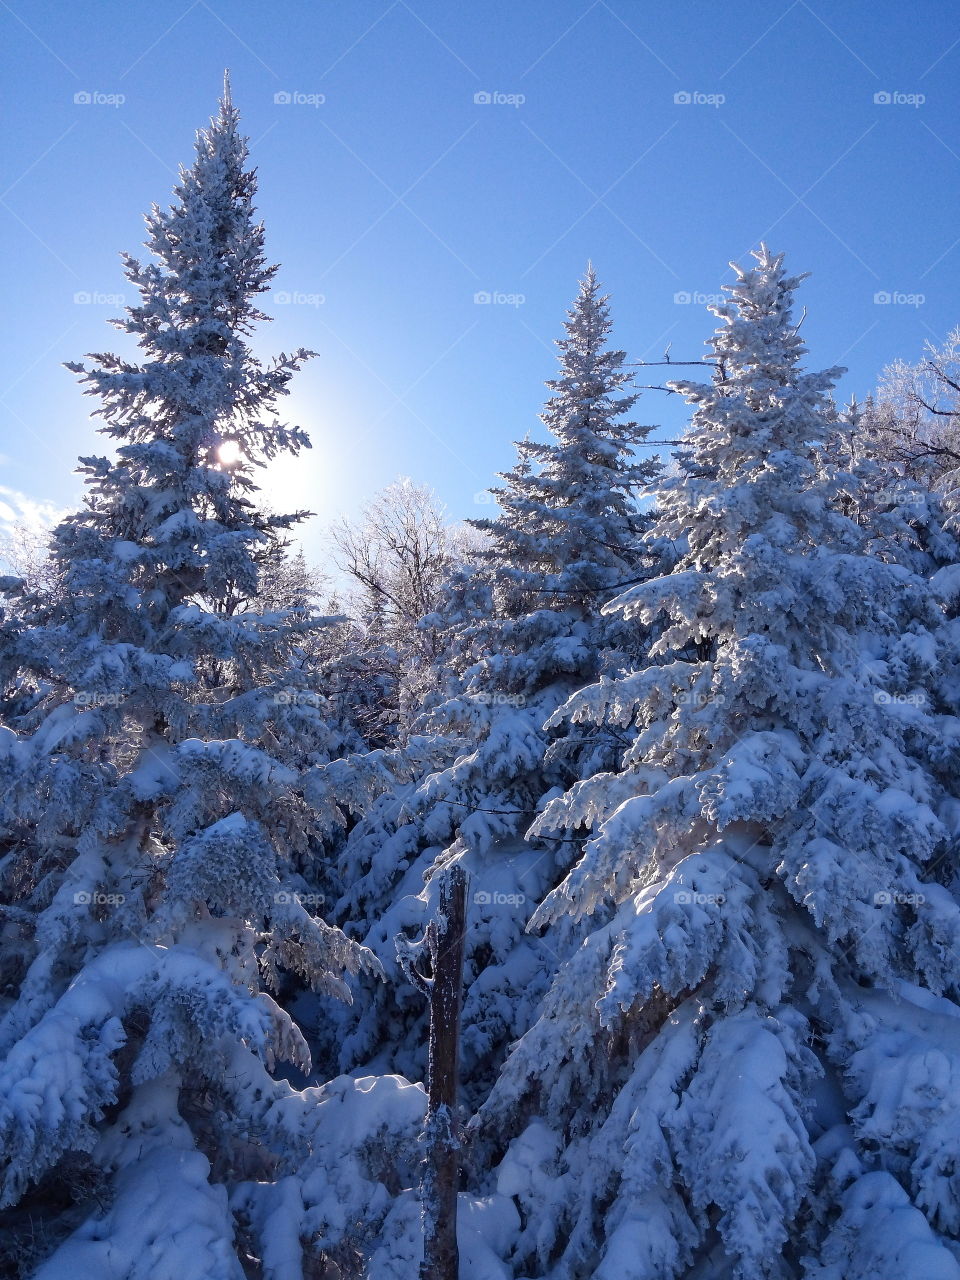 Low angle view of pine trees in winter